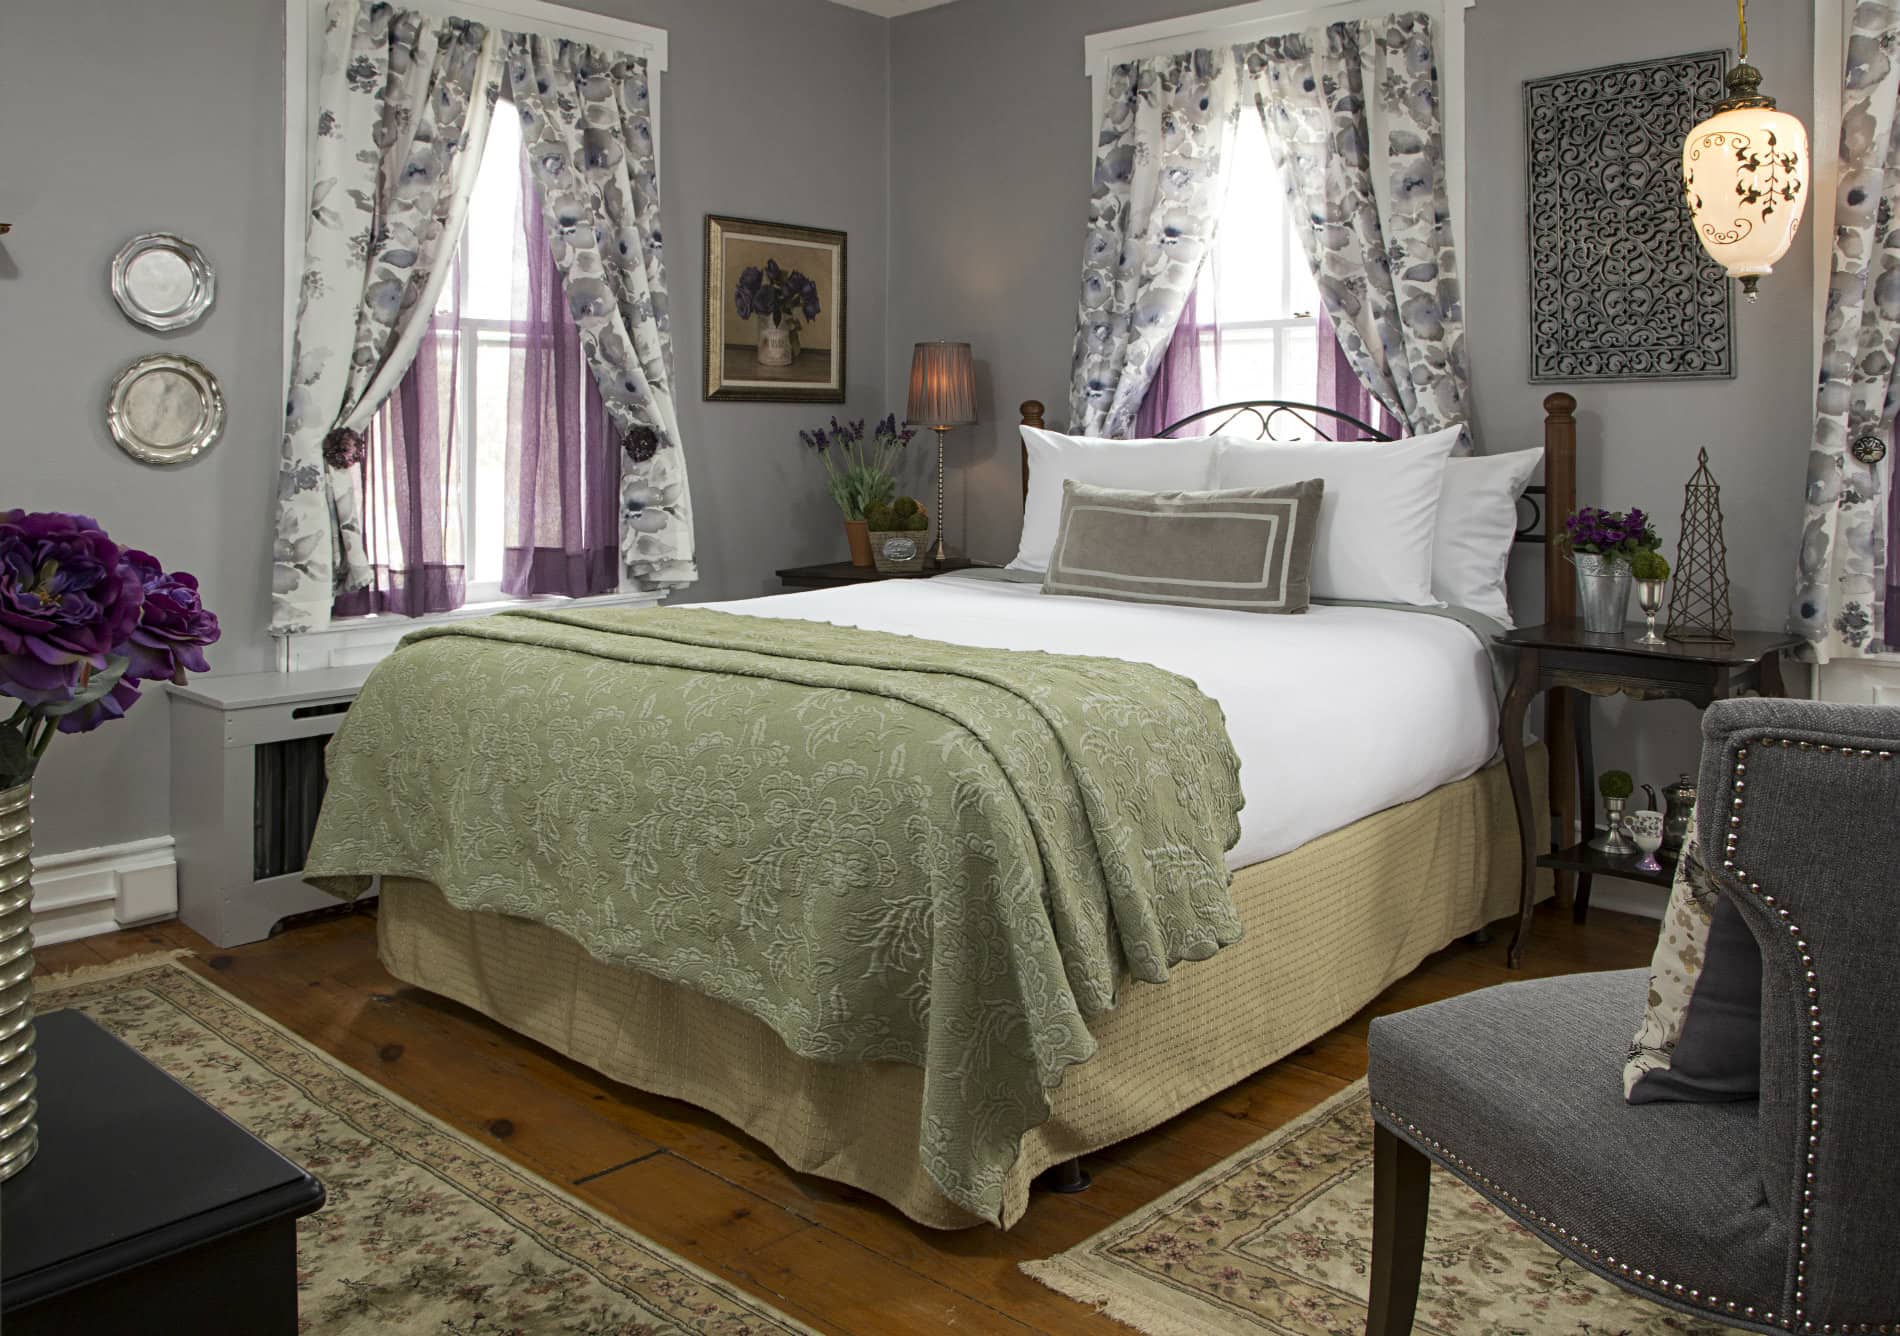 Grey room with bed covered in white linens with green quilt. Two windows by the bed have floral print curtains with purple sheers